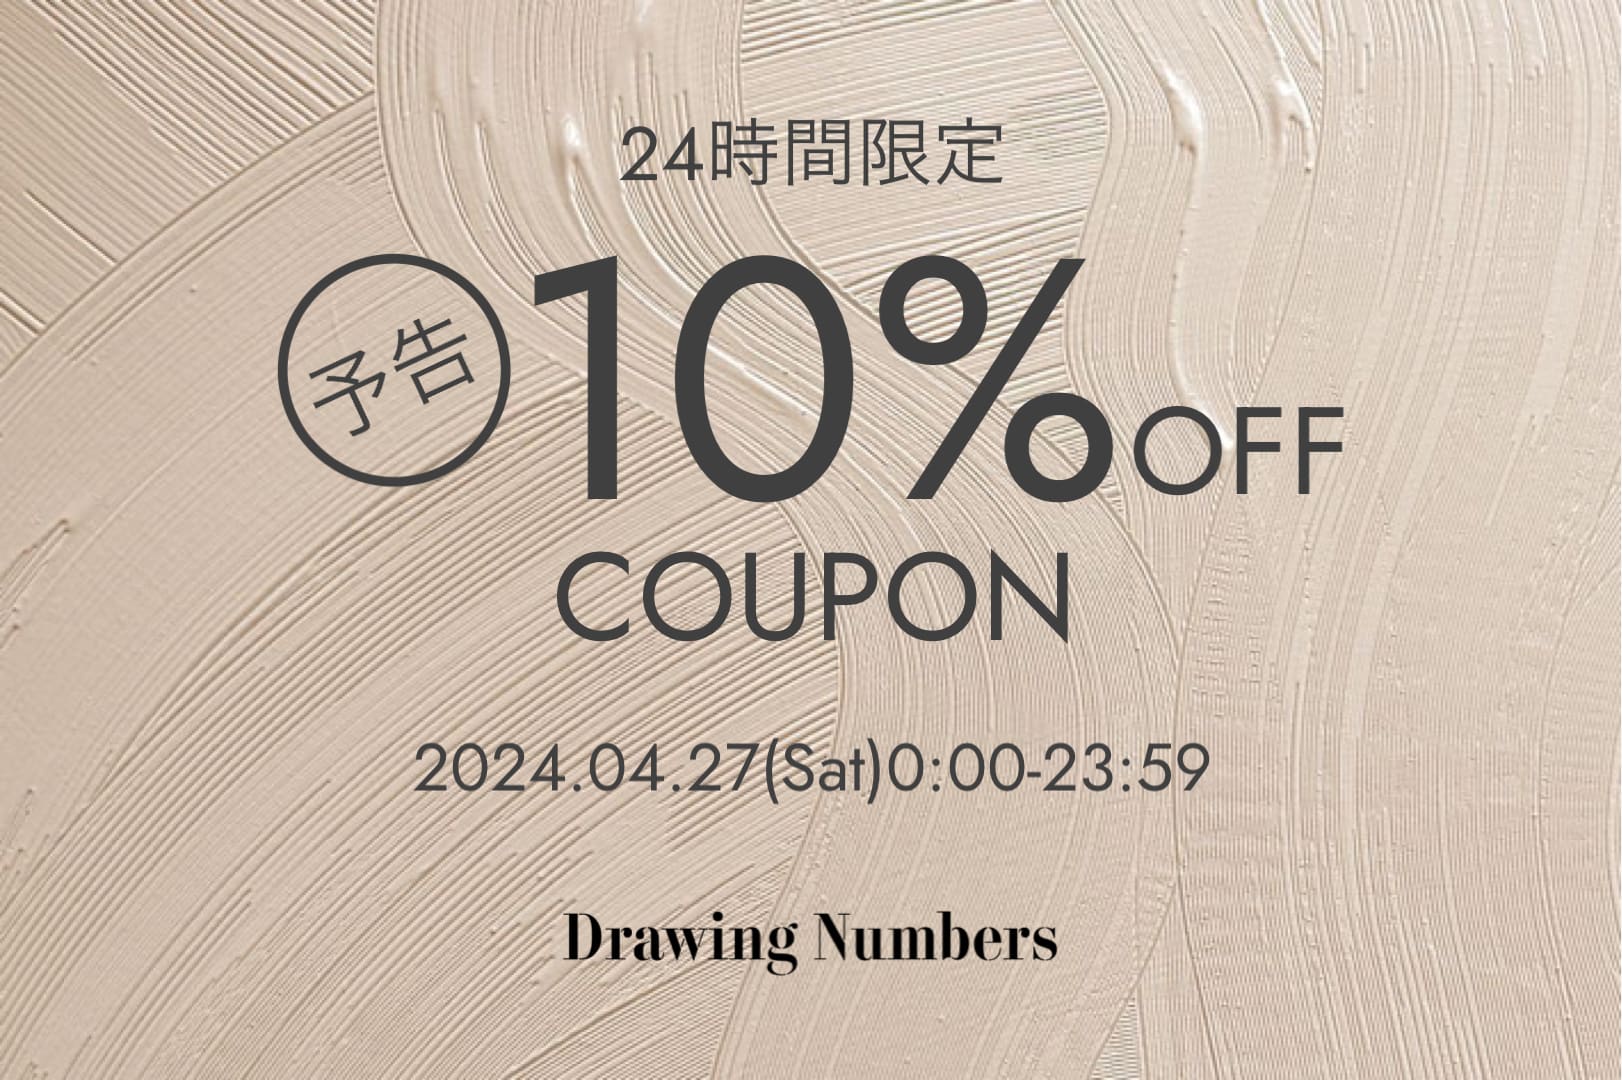 Drawing Numbers ＼予告／【24時間限定】10％OFFクーポン配布！